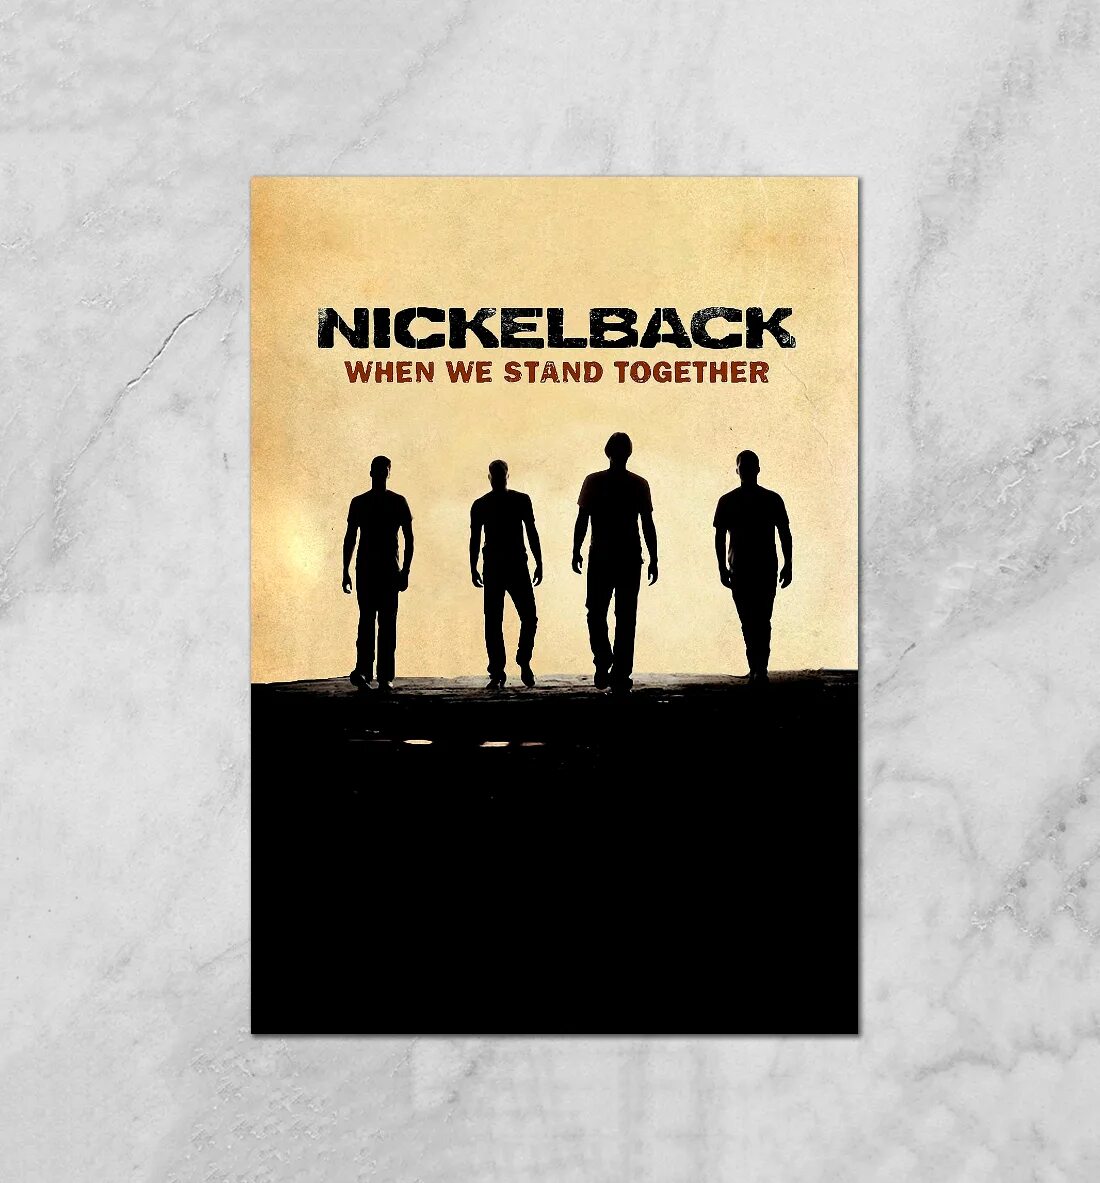 Nickelback when we Stand together. Плакат Nickelback. Nickelback Постер. Никельбэк when we Stand together.